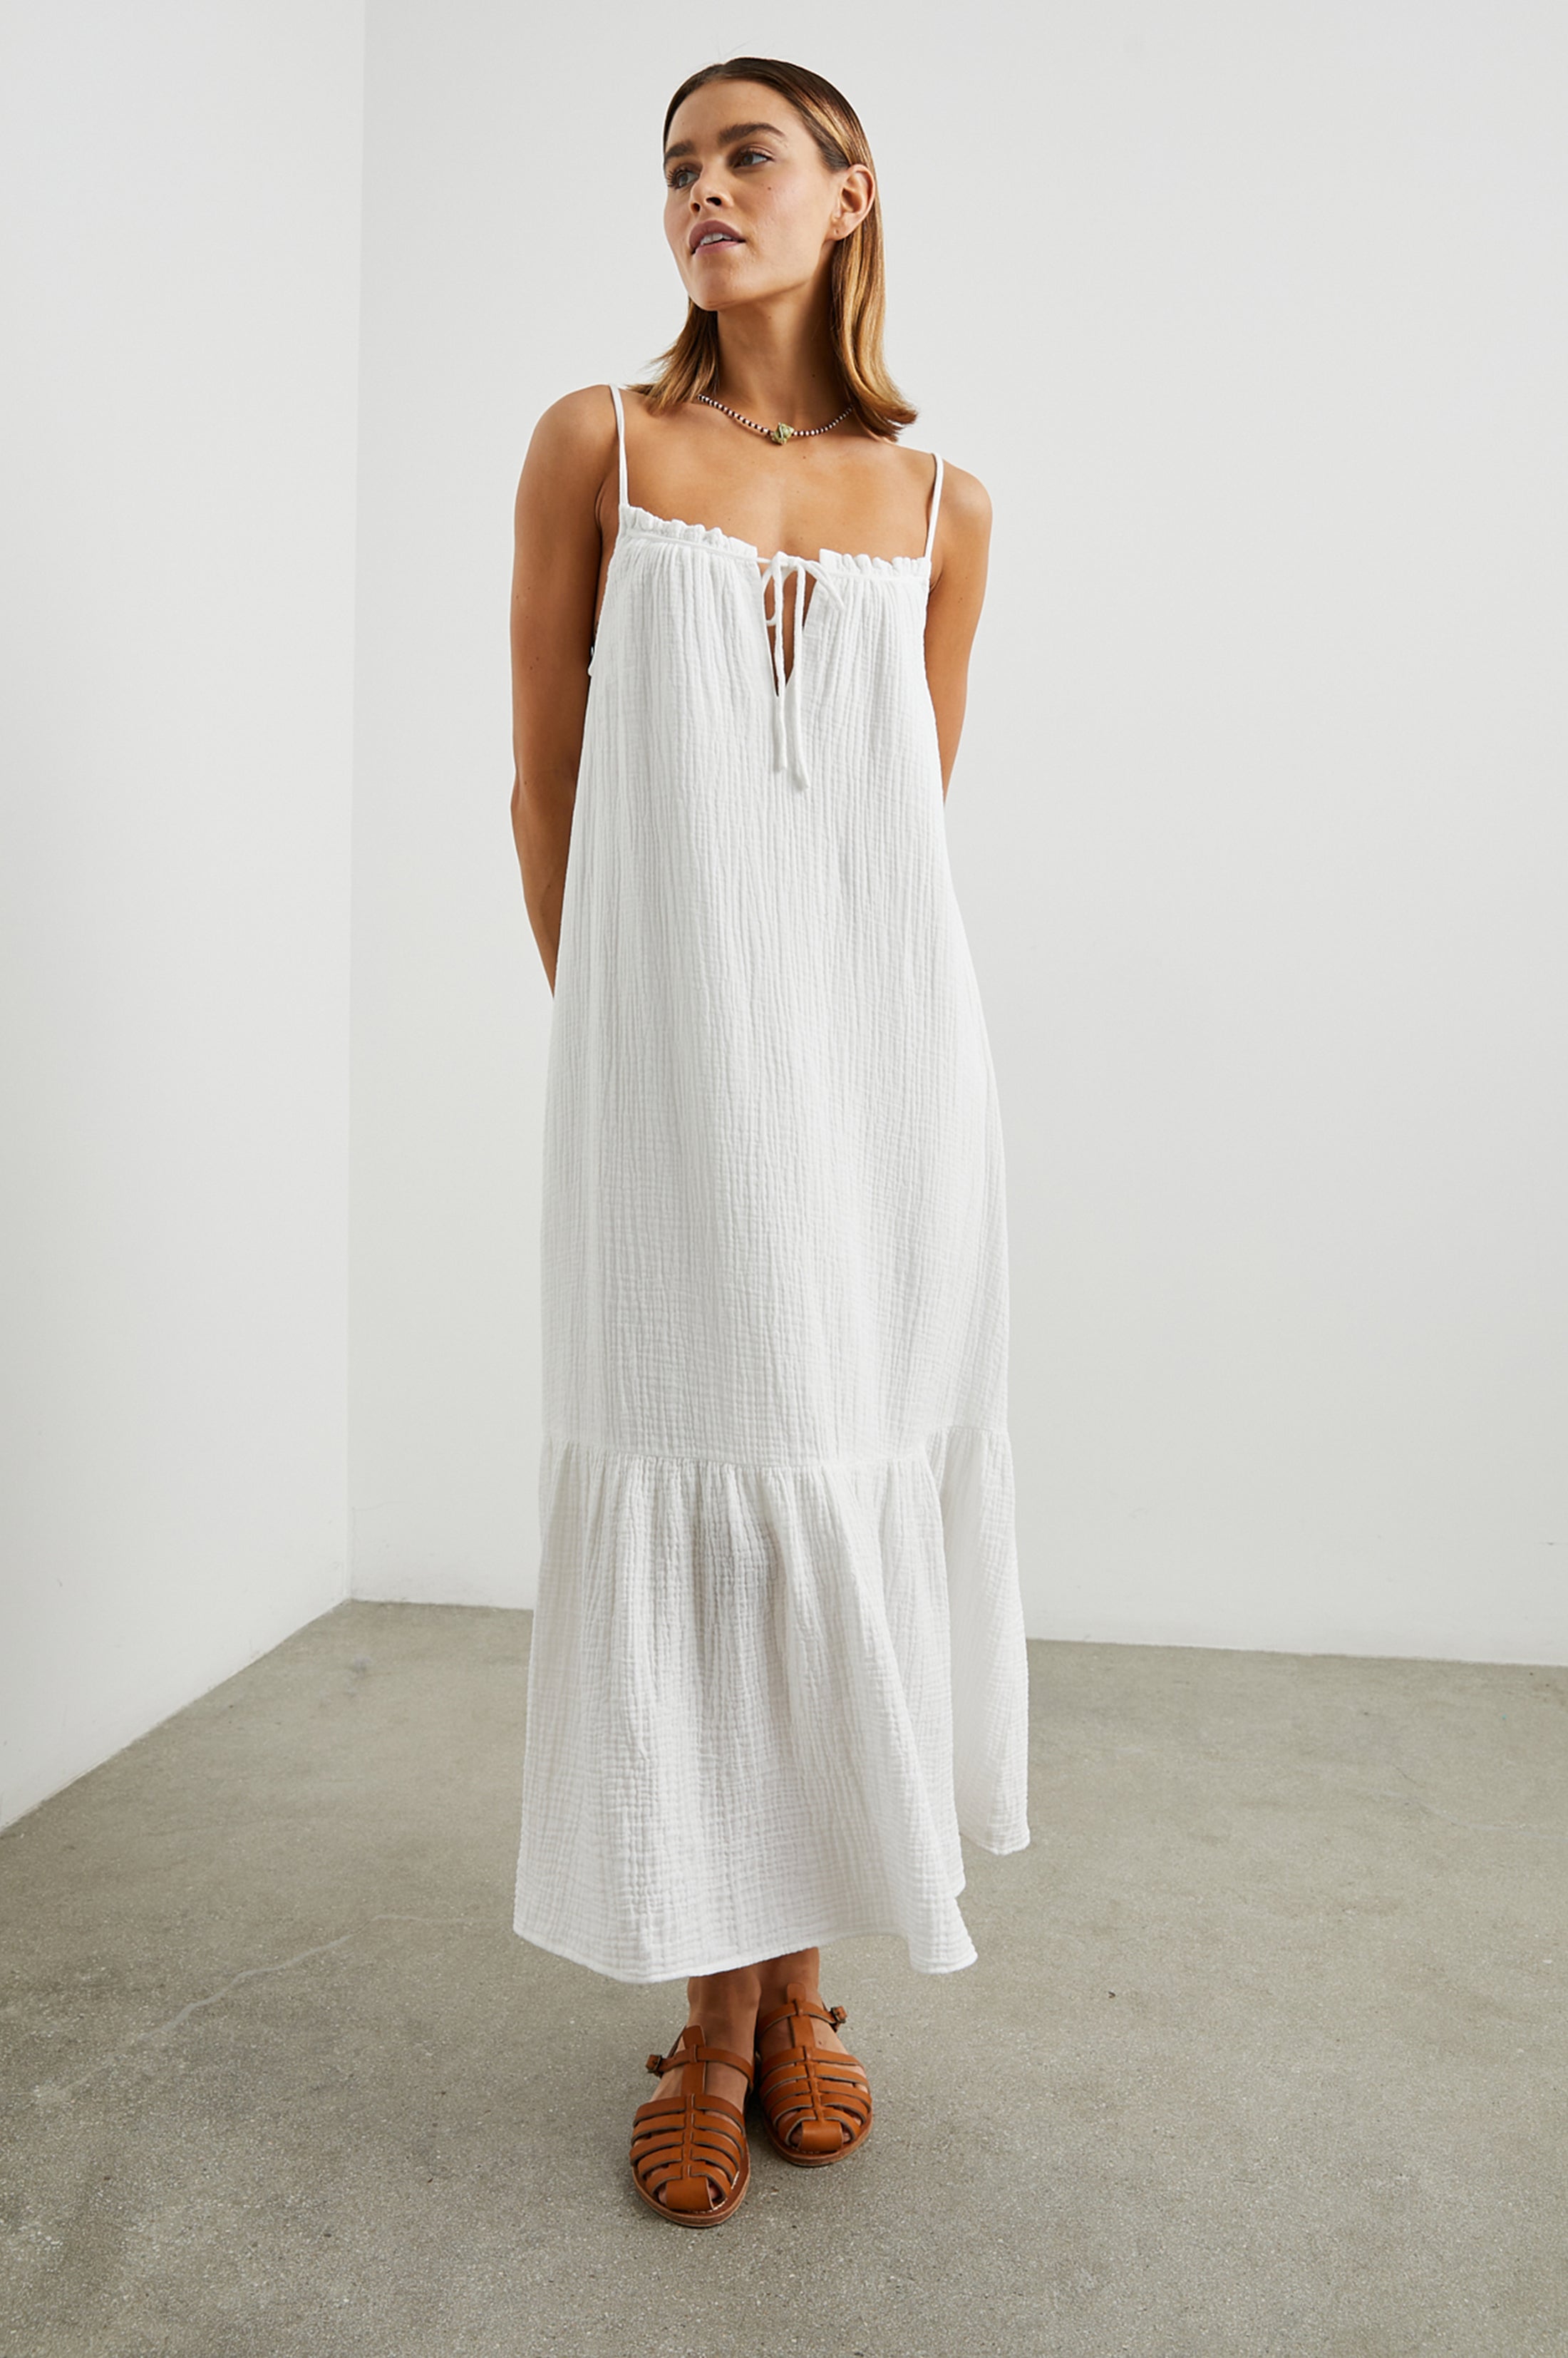 Strappy white cotton muslin dress with tie detail at the neckline and a deep ruffle at the hem